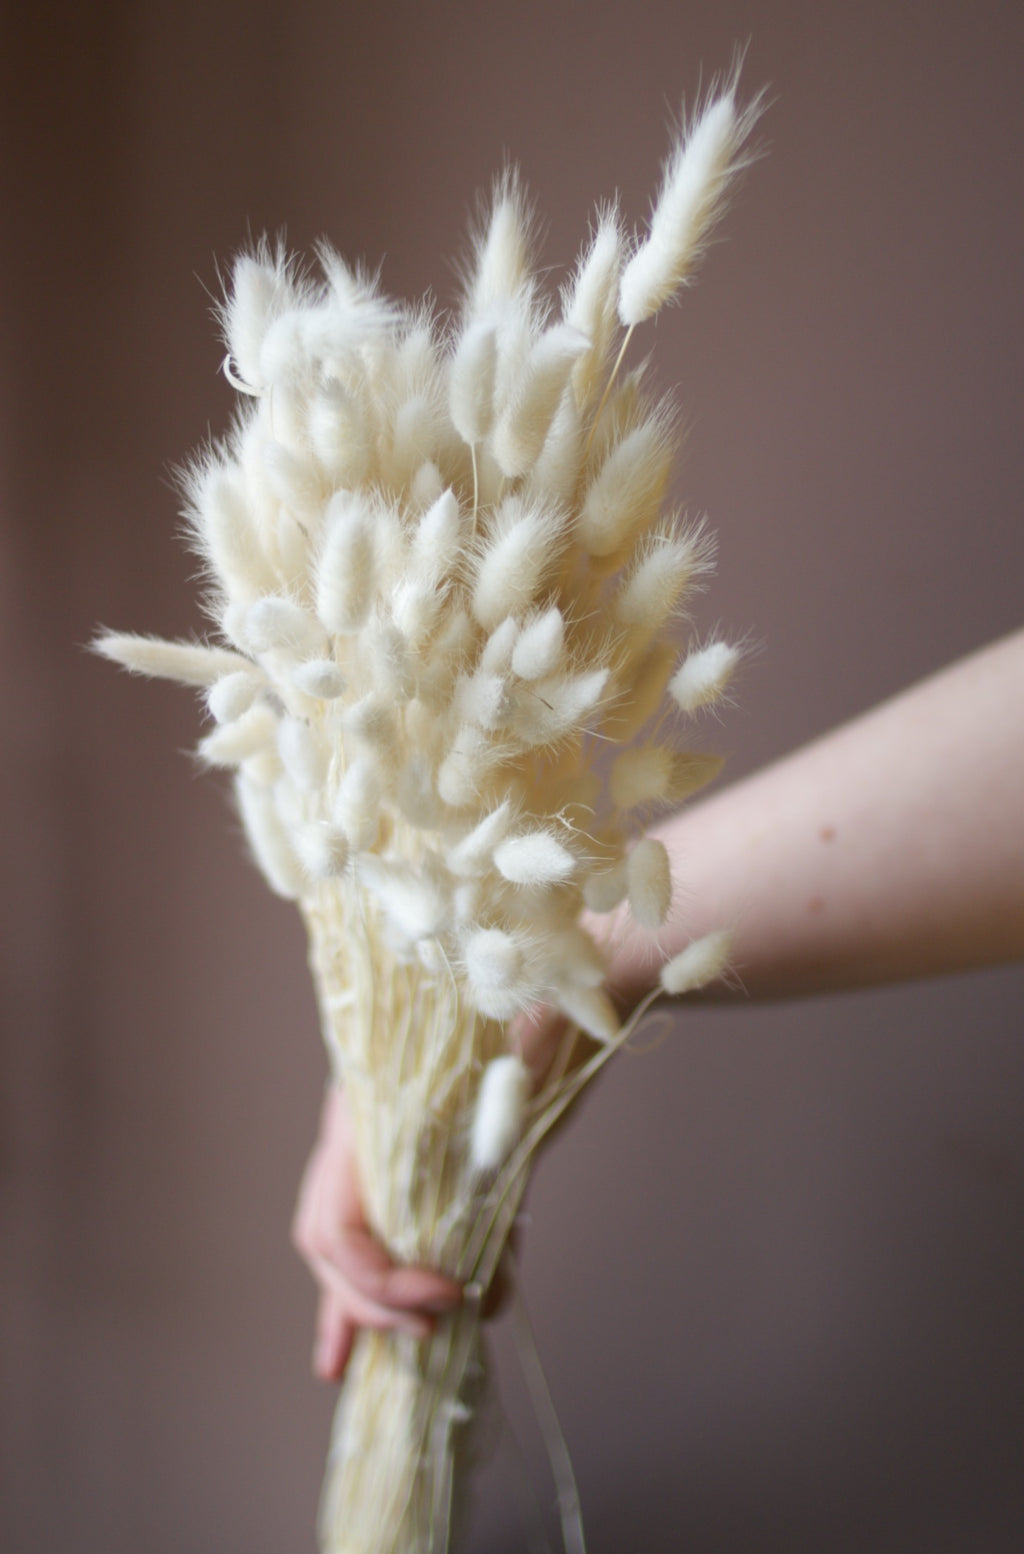 Dried bunny tails